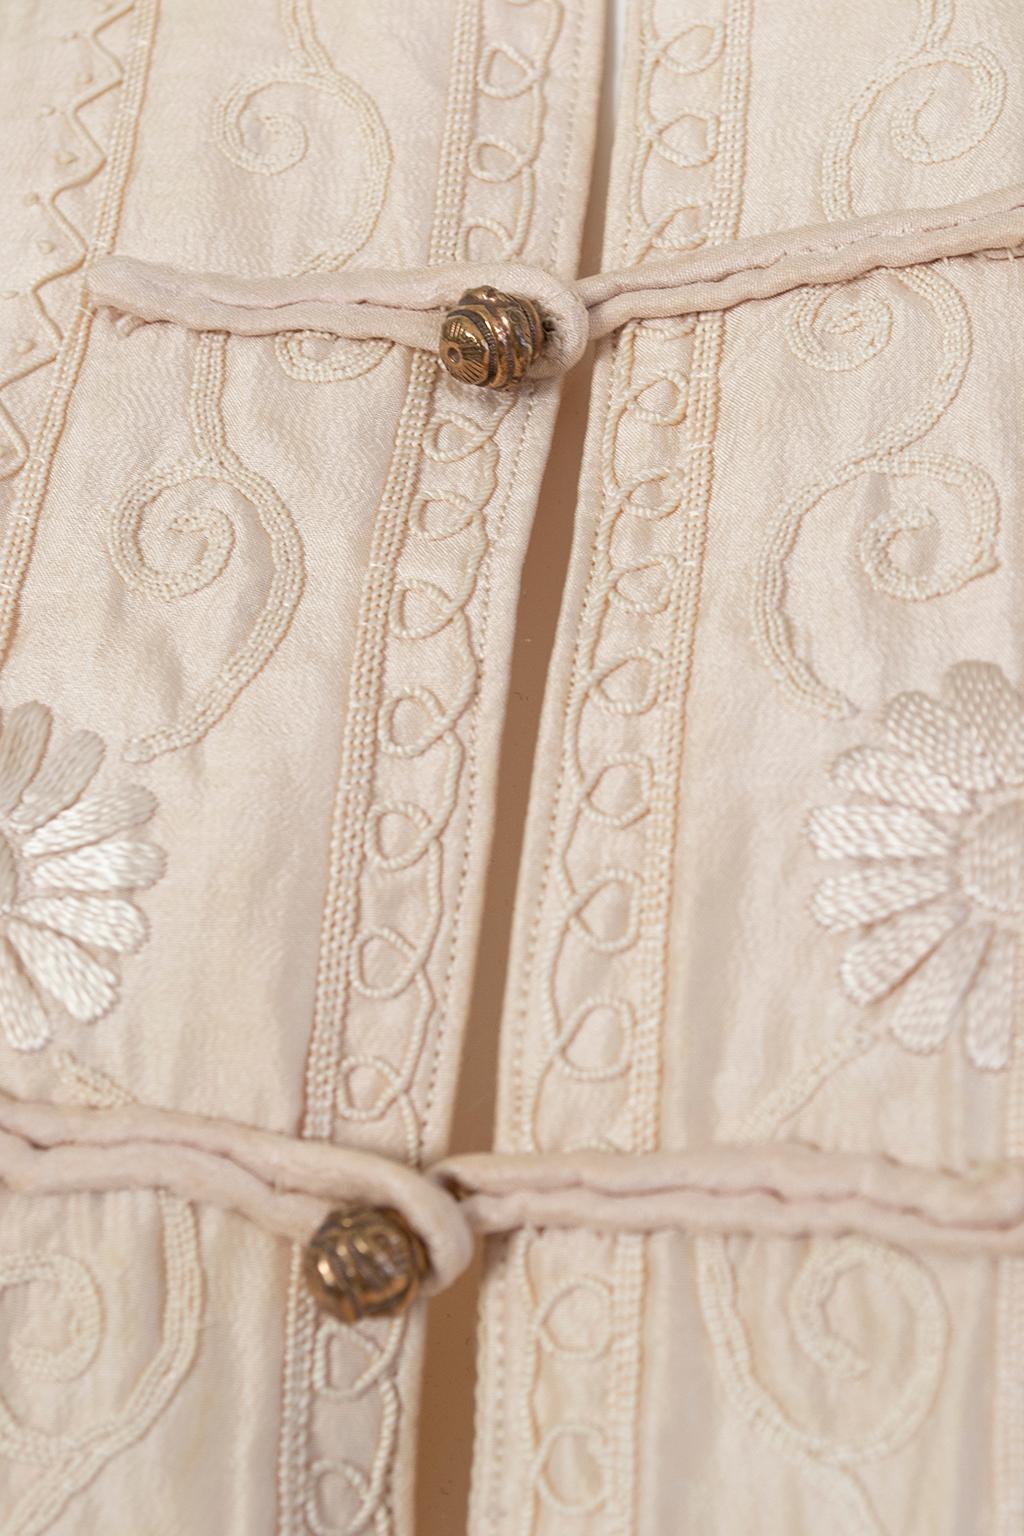 Blush Edwardian *Larger Size* Padded Canton Silk Embroidered Robe - O/S, 1900s For Sale 1